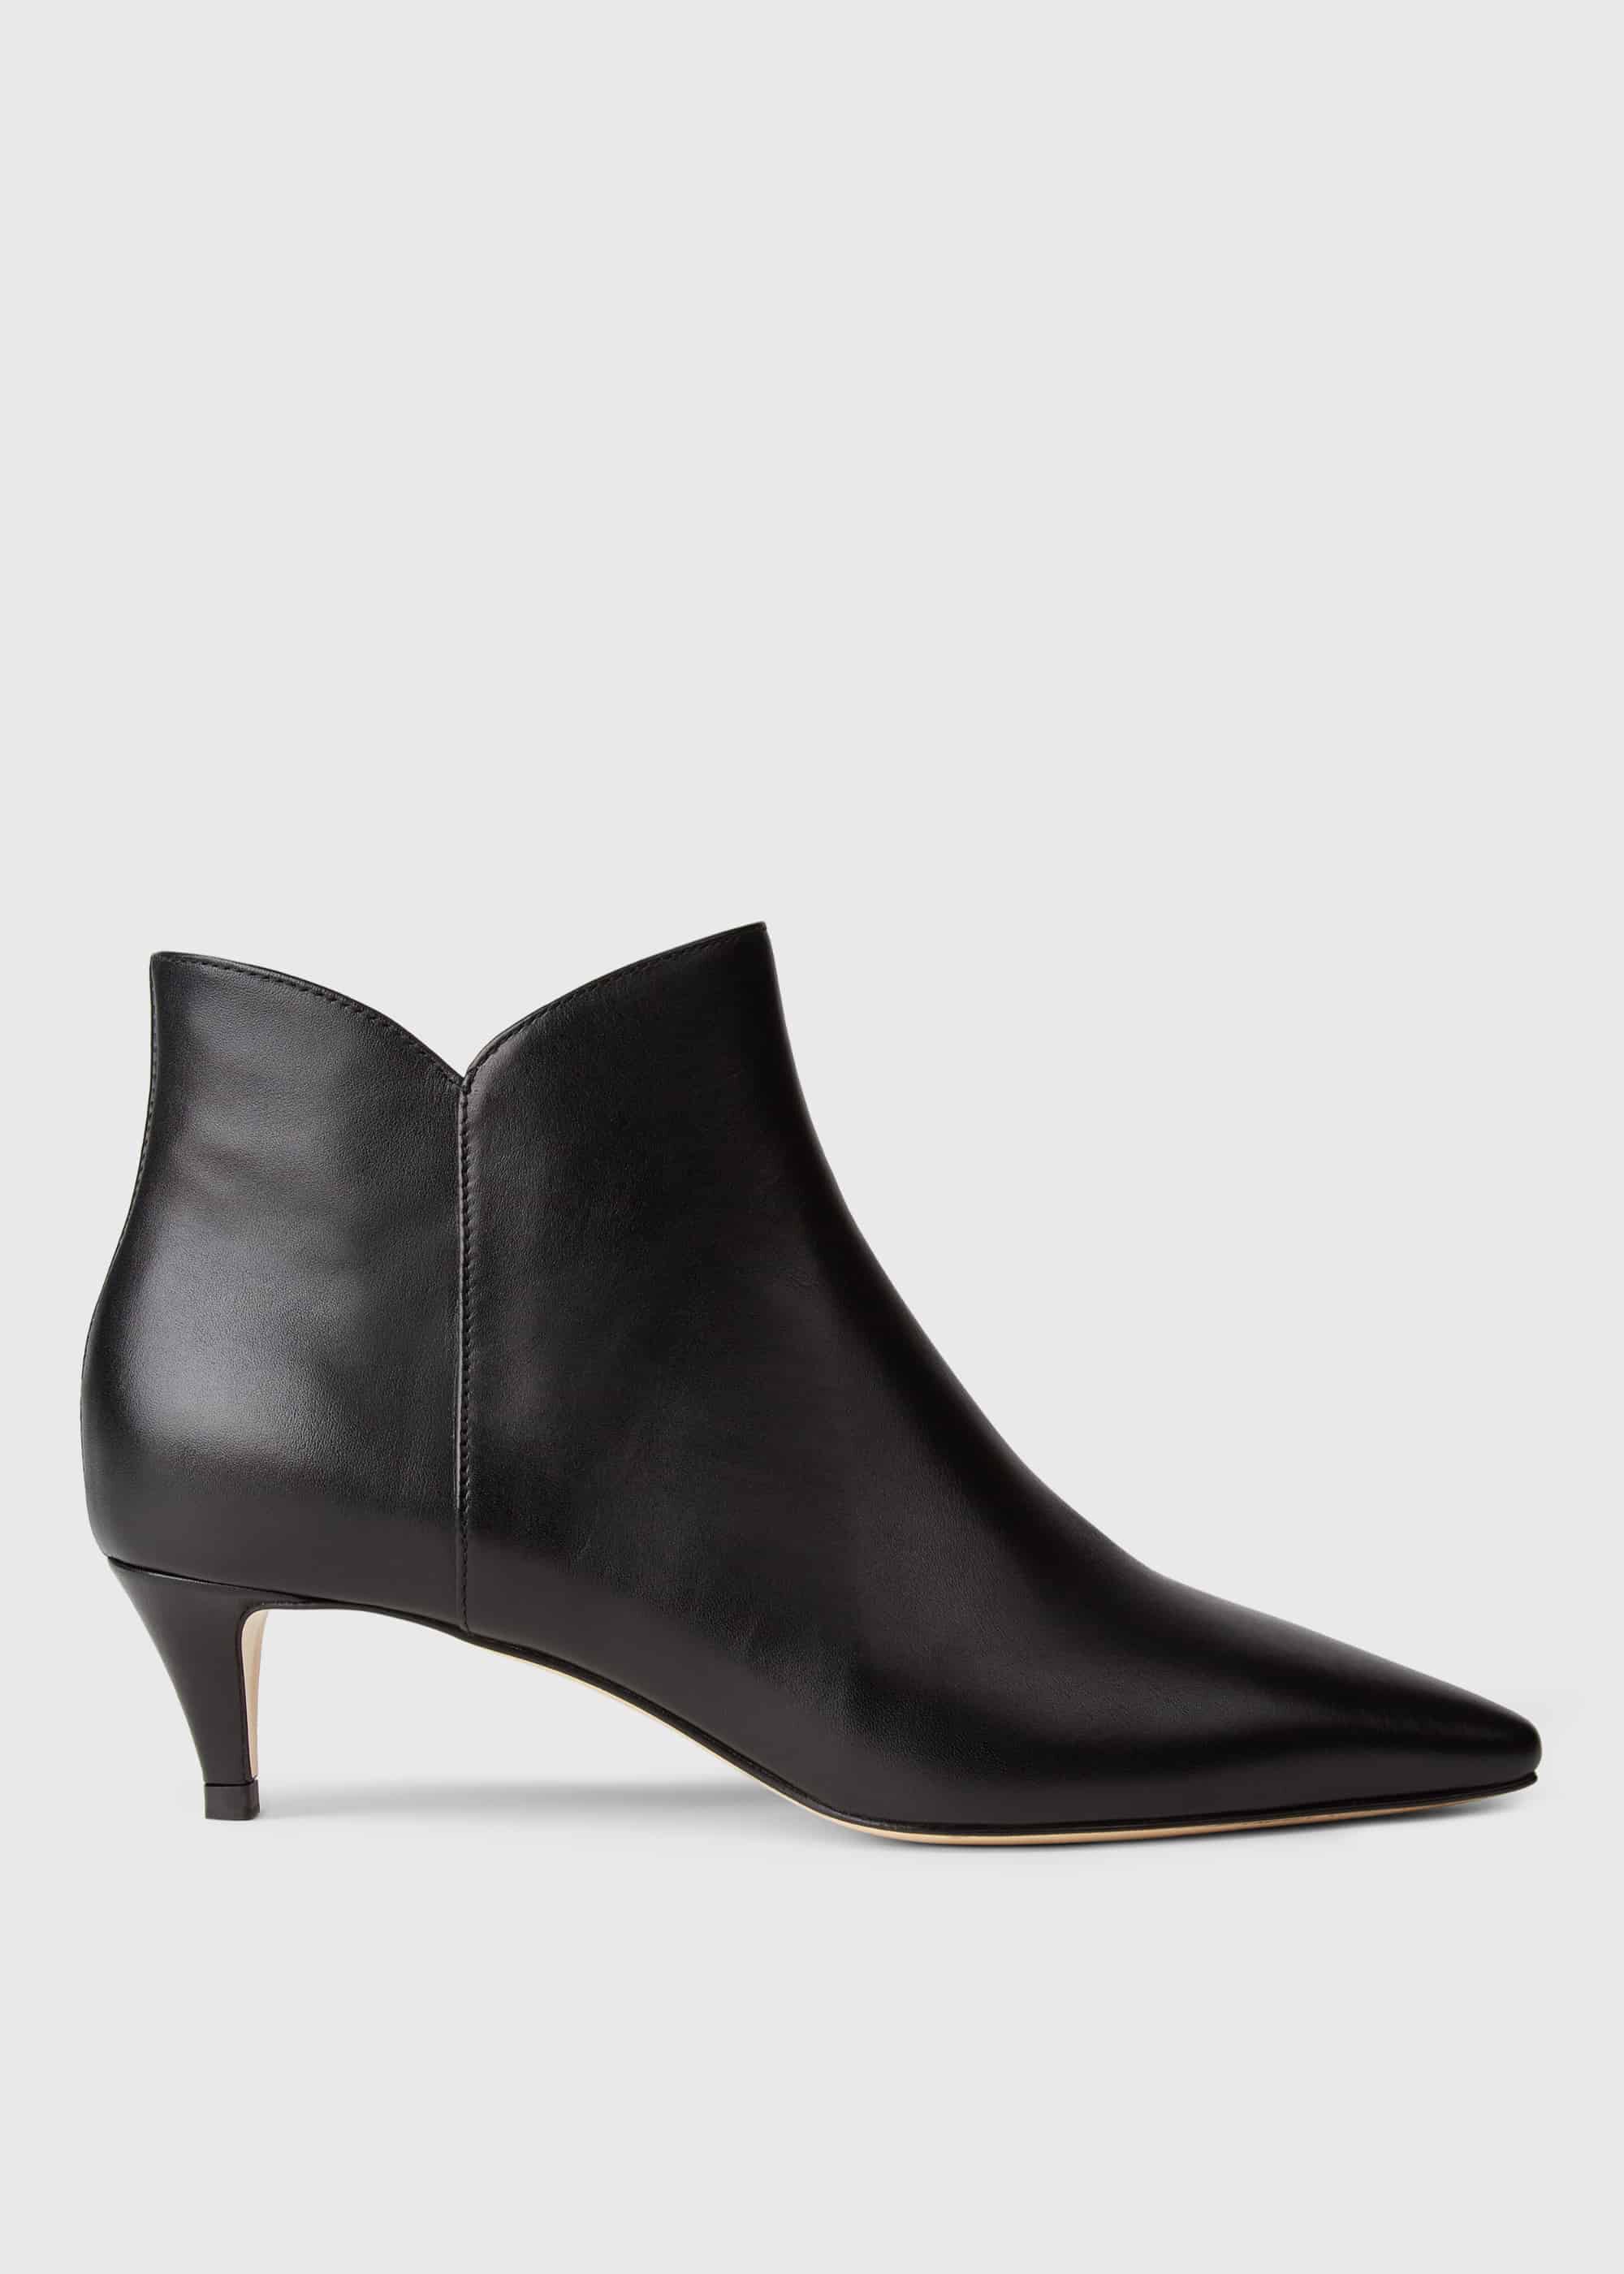 Pre-owned Hobbs Abbey Ankle Boot